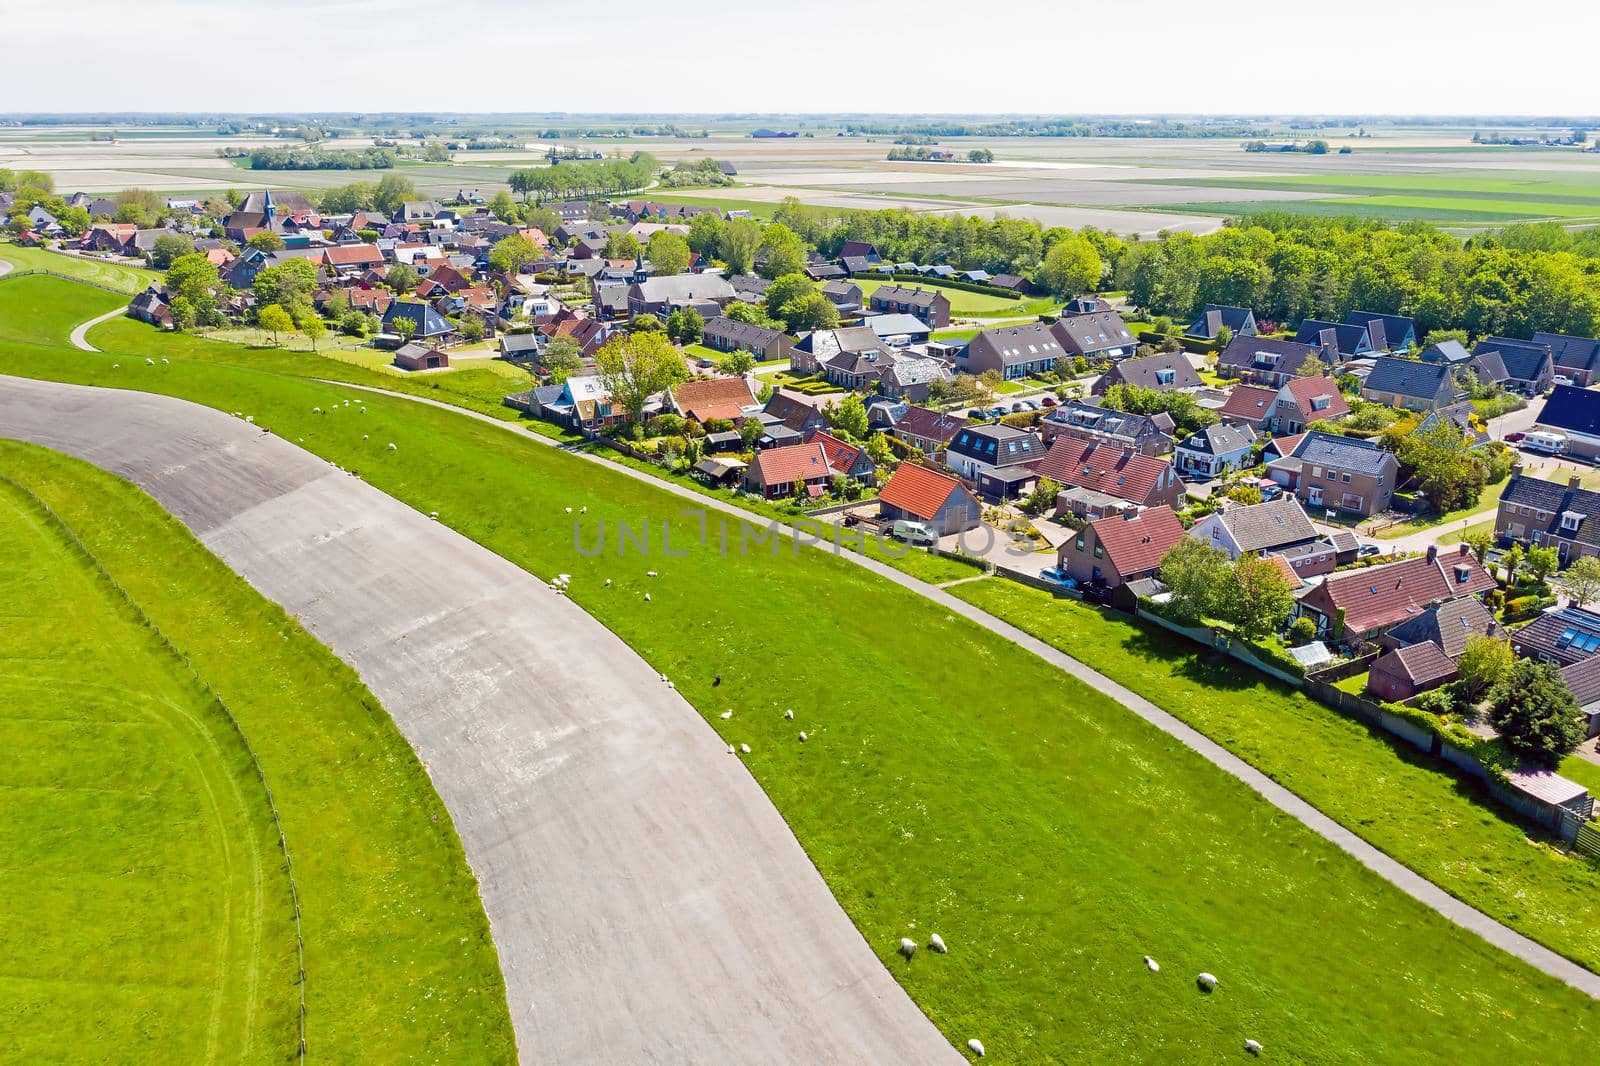 Aerial from the village Moddergat at the Wadden Sea in Friesland the Netherlands